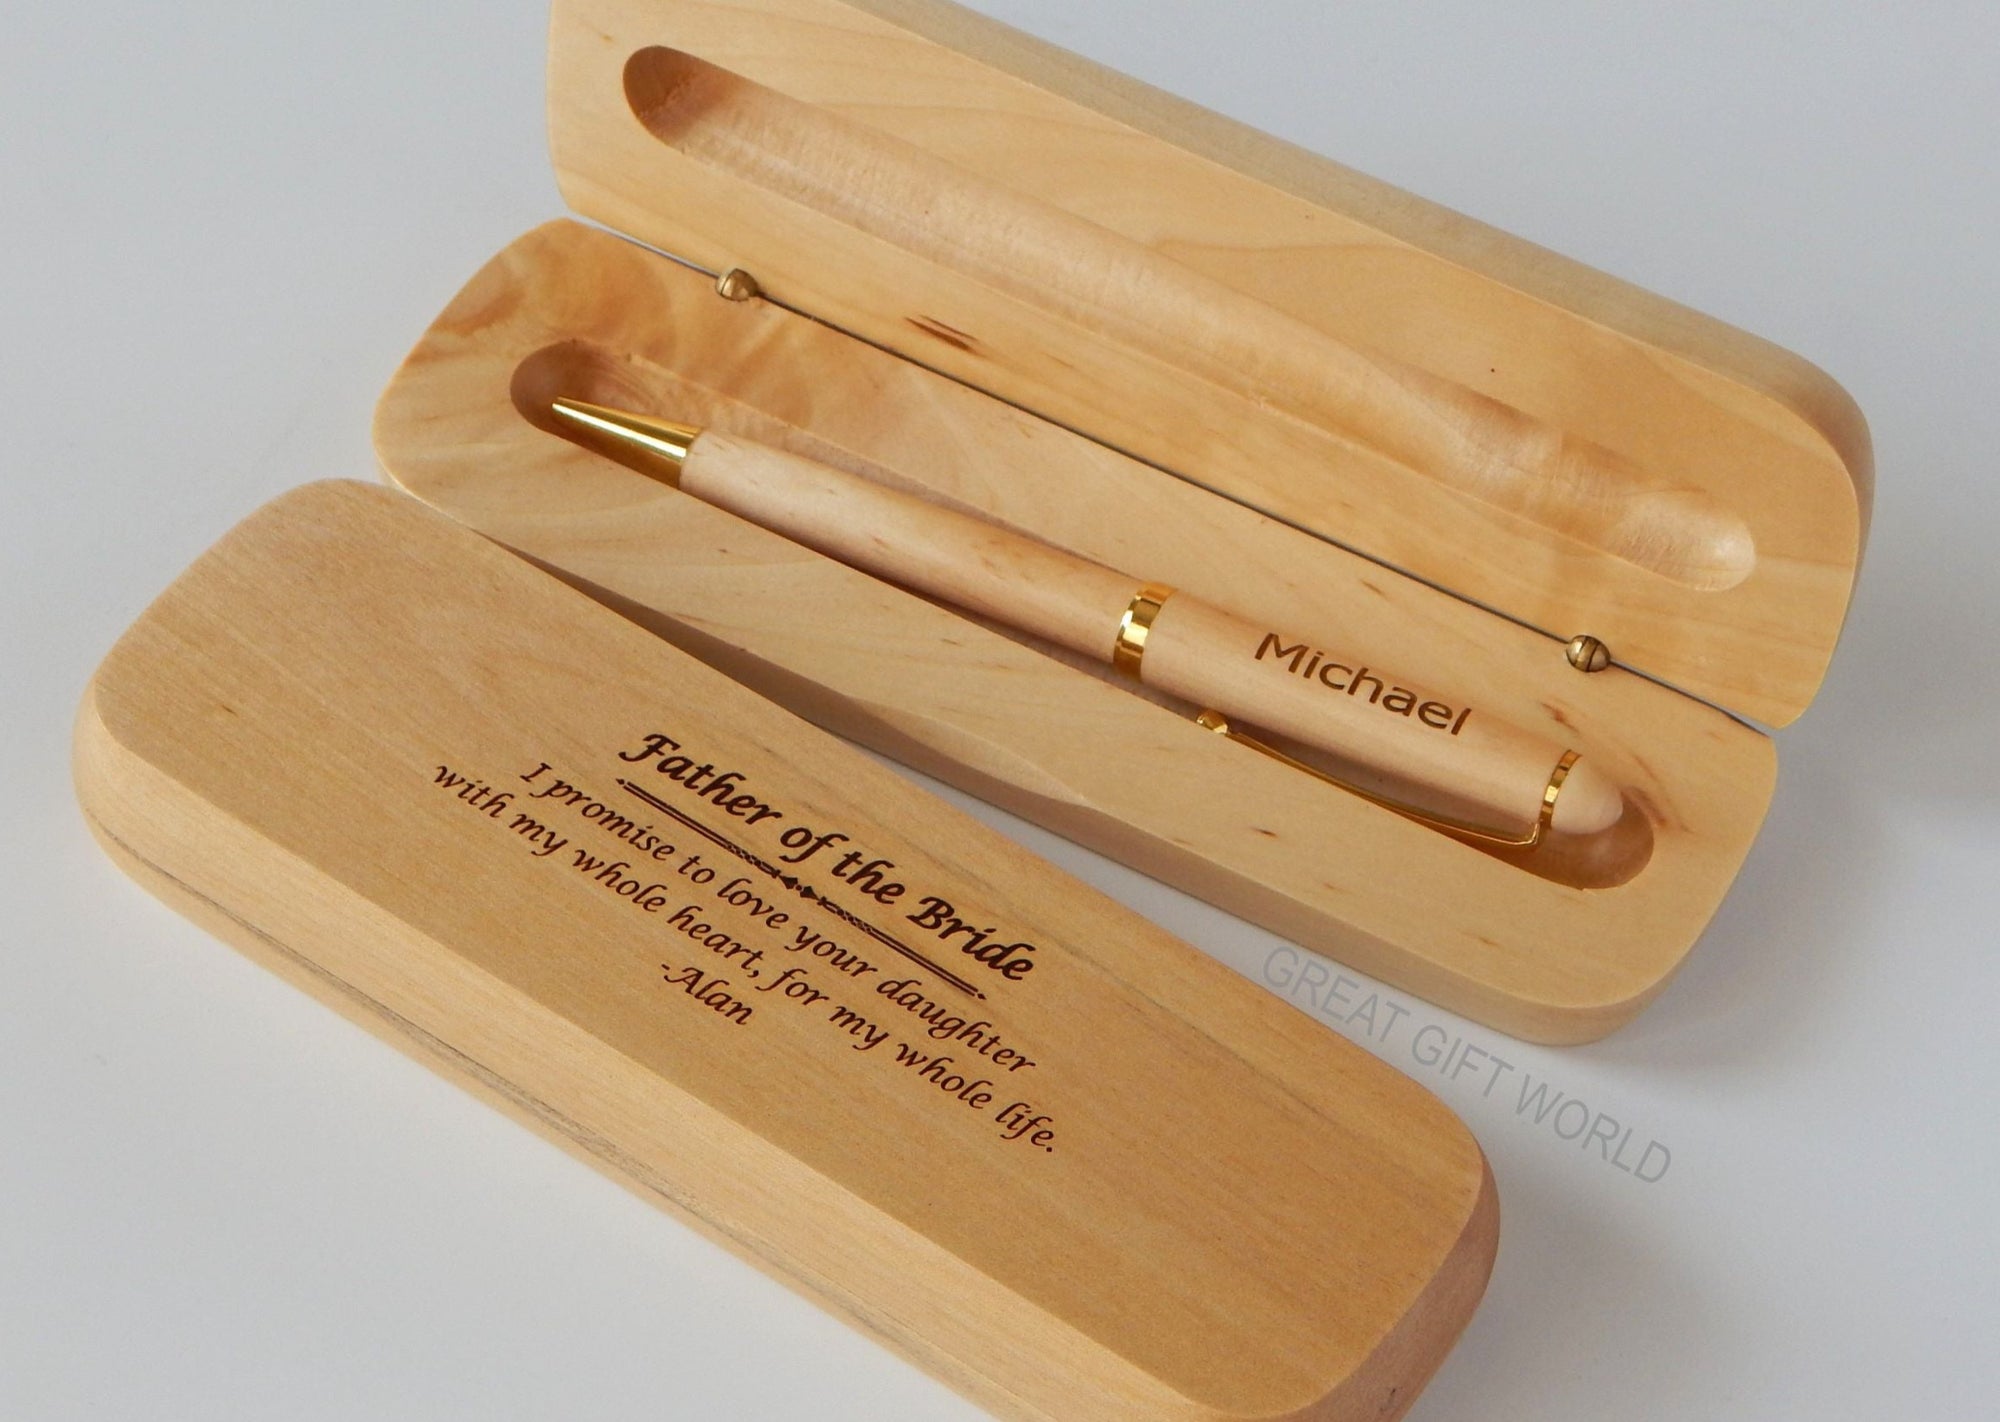 Father of the Bride Gift from Groom | Personalized Wood Pen